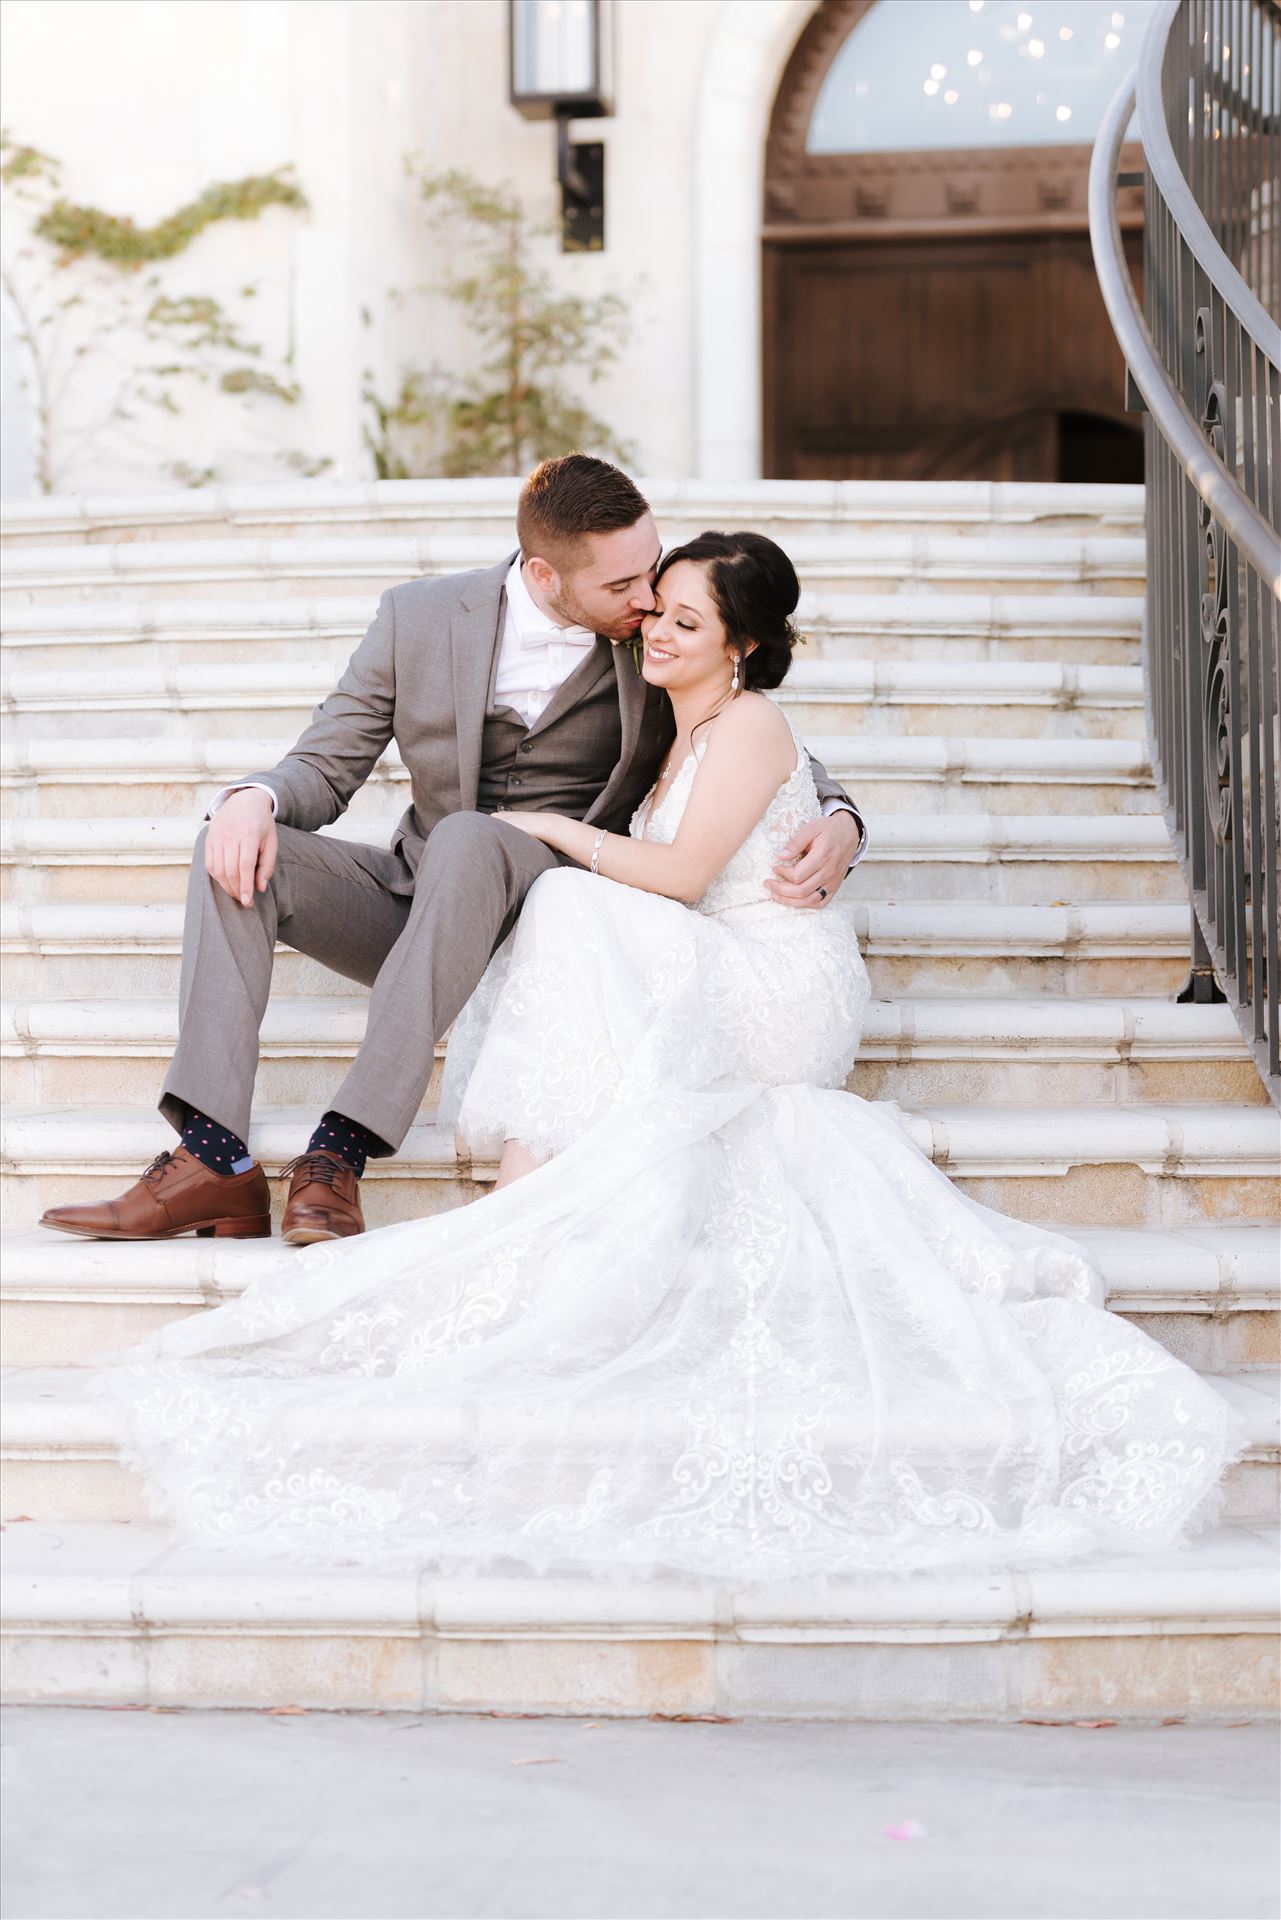 FW-6827.JPG - Tooth and Nail Winery elegant and formal wedding in Paso Robles California wine country by Mirror's Edge Photography, San Luis Obispo County Wedding Photographer. Bride and Groom in front of the castle in Paso Robles California by Sarah Williams